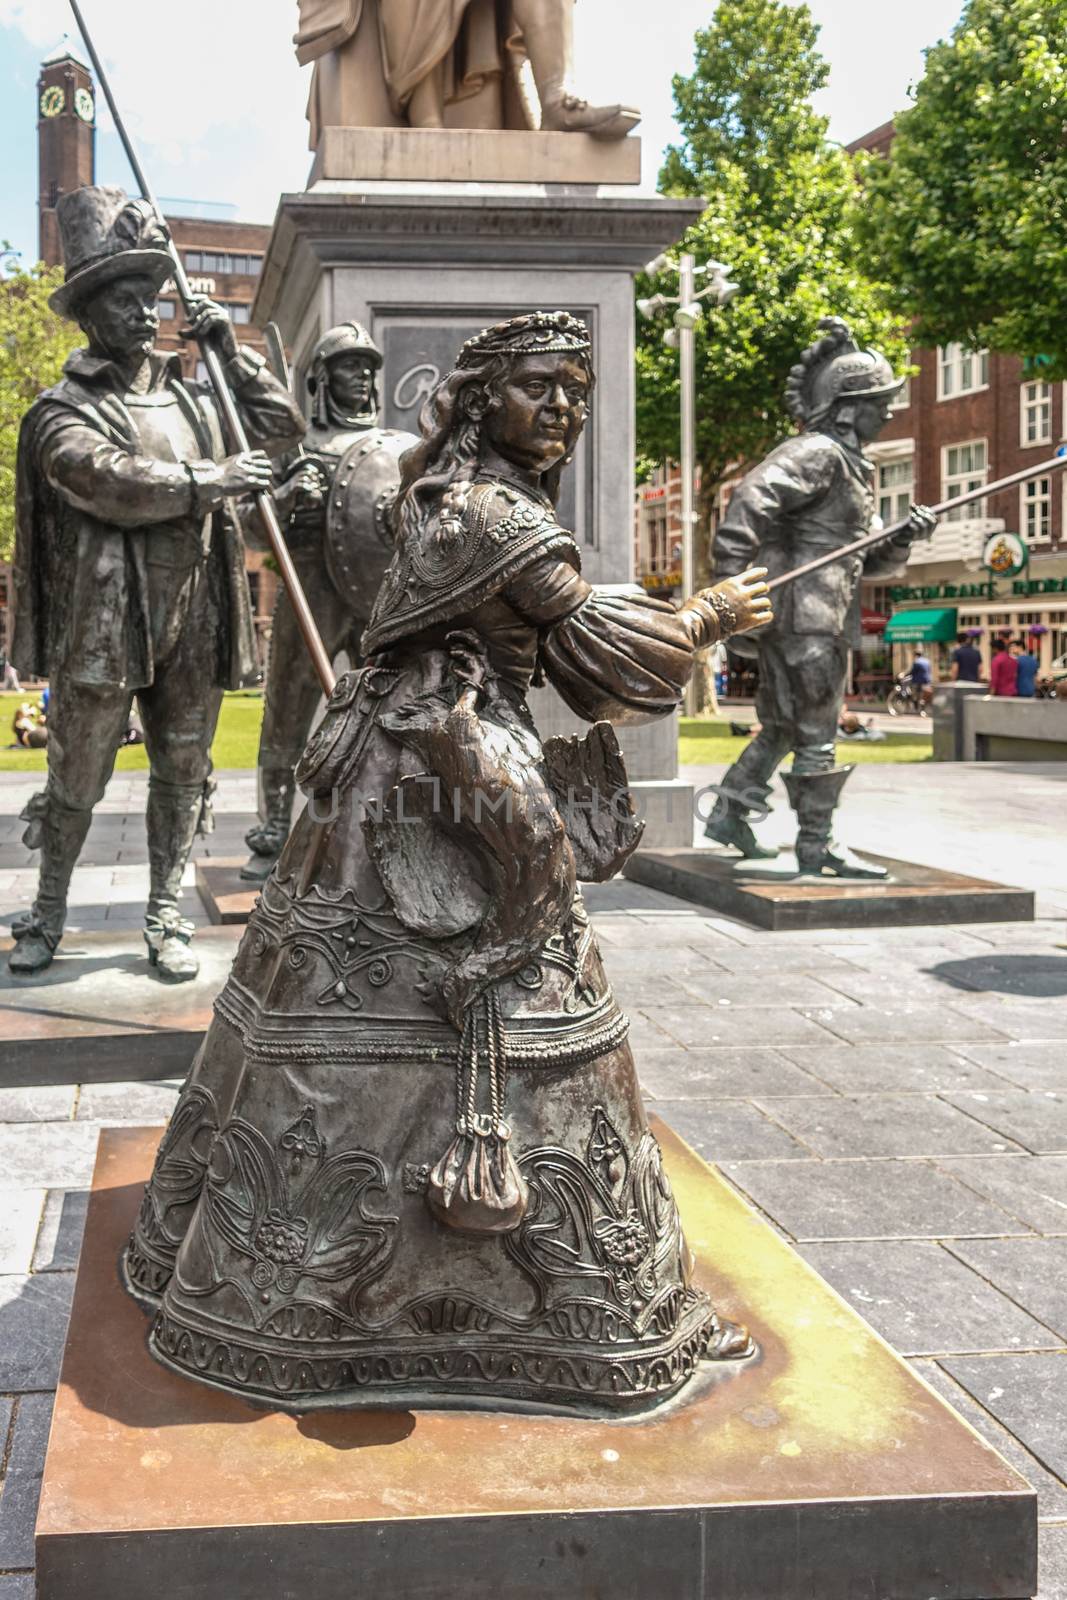 Amsterdam, the Netherlands - July 1, 2019: De Nachtwacht compostion of statues on Rembrandtplein. full body of sole female figure with other statues in back.